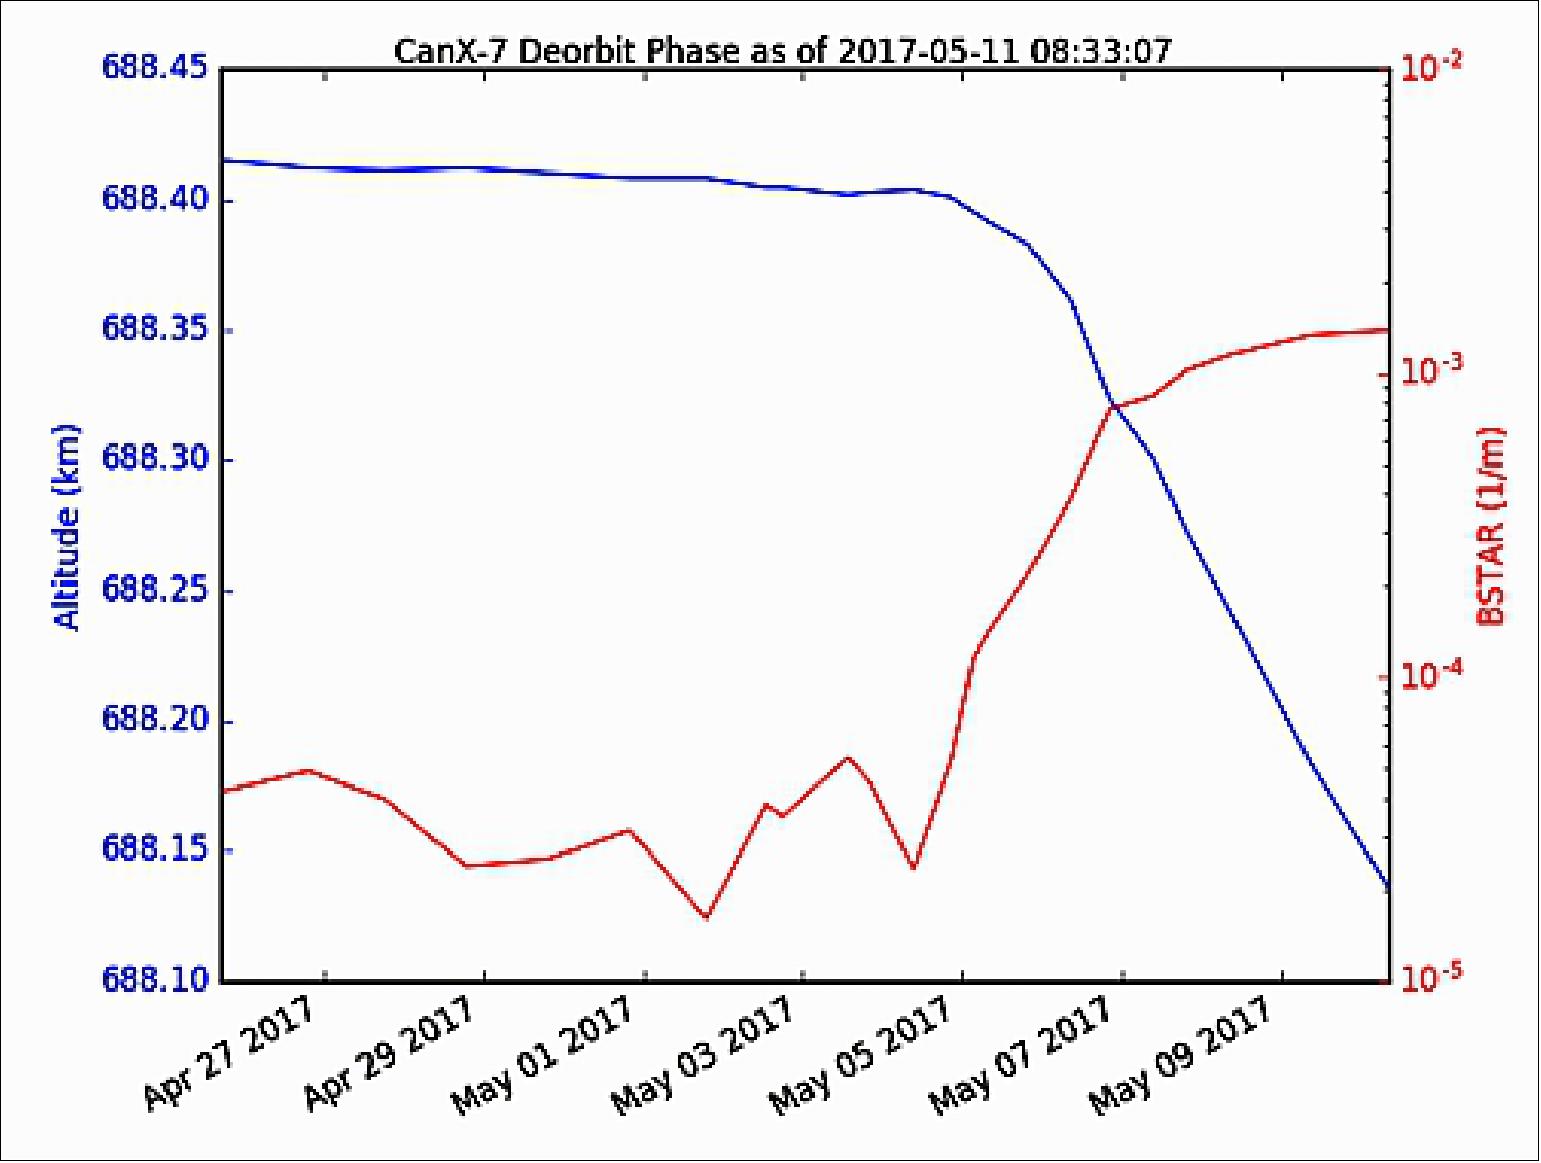 Figure 11: CanX-7's early deorbiting progress. In blue, CanX-7's altitude, covering the period immediately before drag sail deployment and one week after. In red, the BSTAR (drag term) component of the two-line elements from NORAD showing increased drag on the satellite (image credit: UTIAS/SFL)